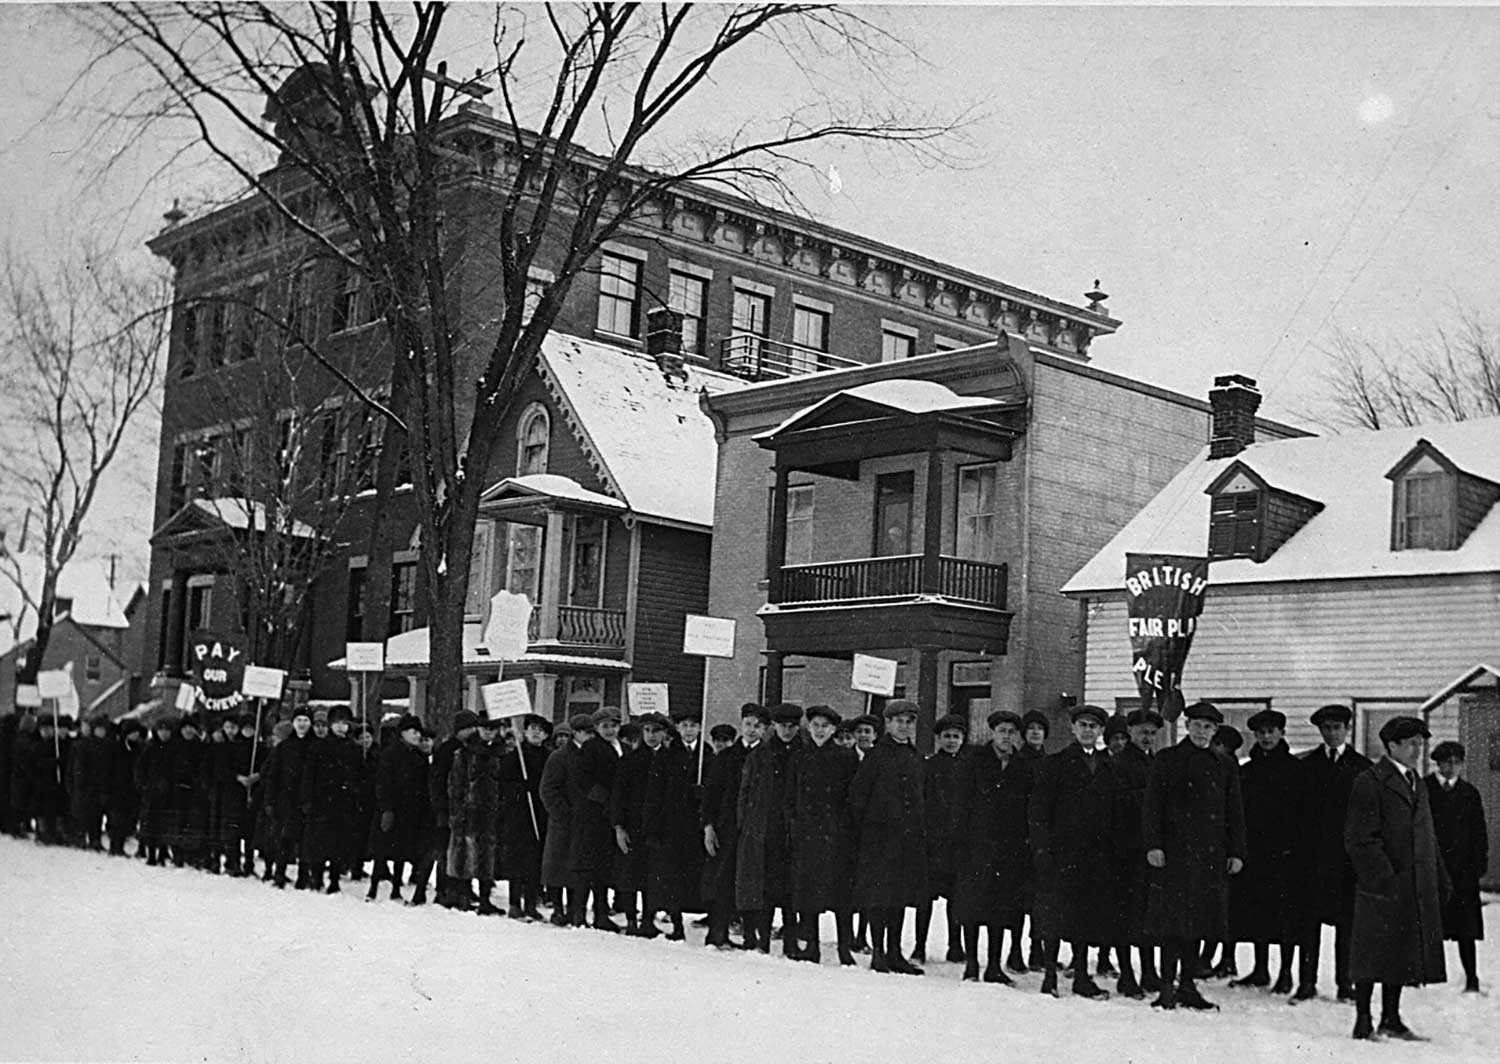 Students demonstrating against Regulation 17 outside Brébeuf School on Anglesea Square in Ottawa’s Lowertown, in late January or early February, 1916 / [Le Droit, Ottawa]. University of Ottawa, Association canadienne-française de l’Ontario archive (C2), Ph2-142a.